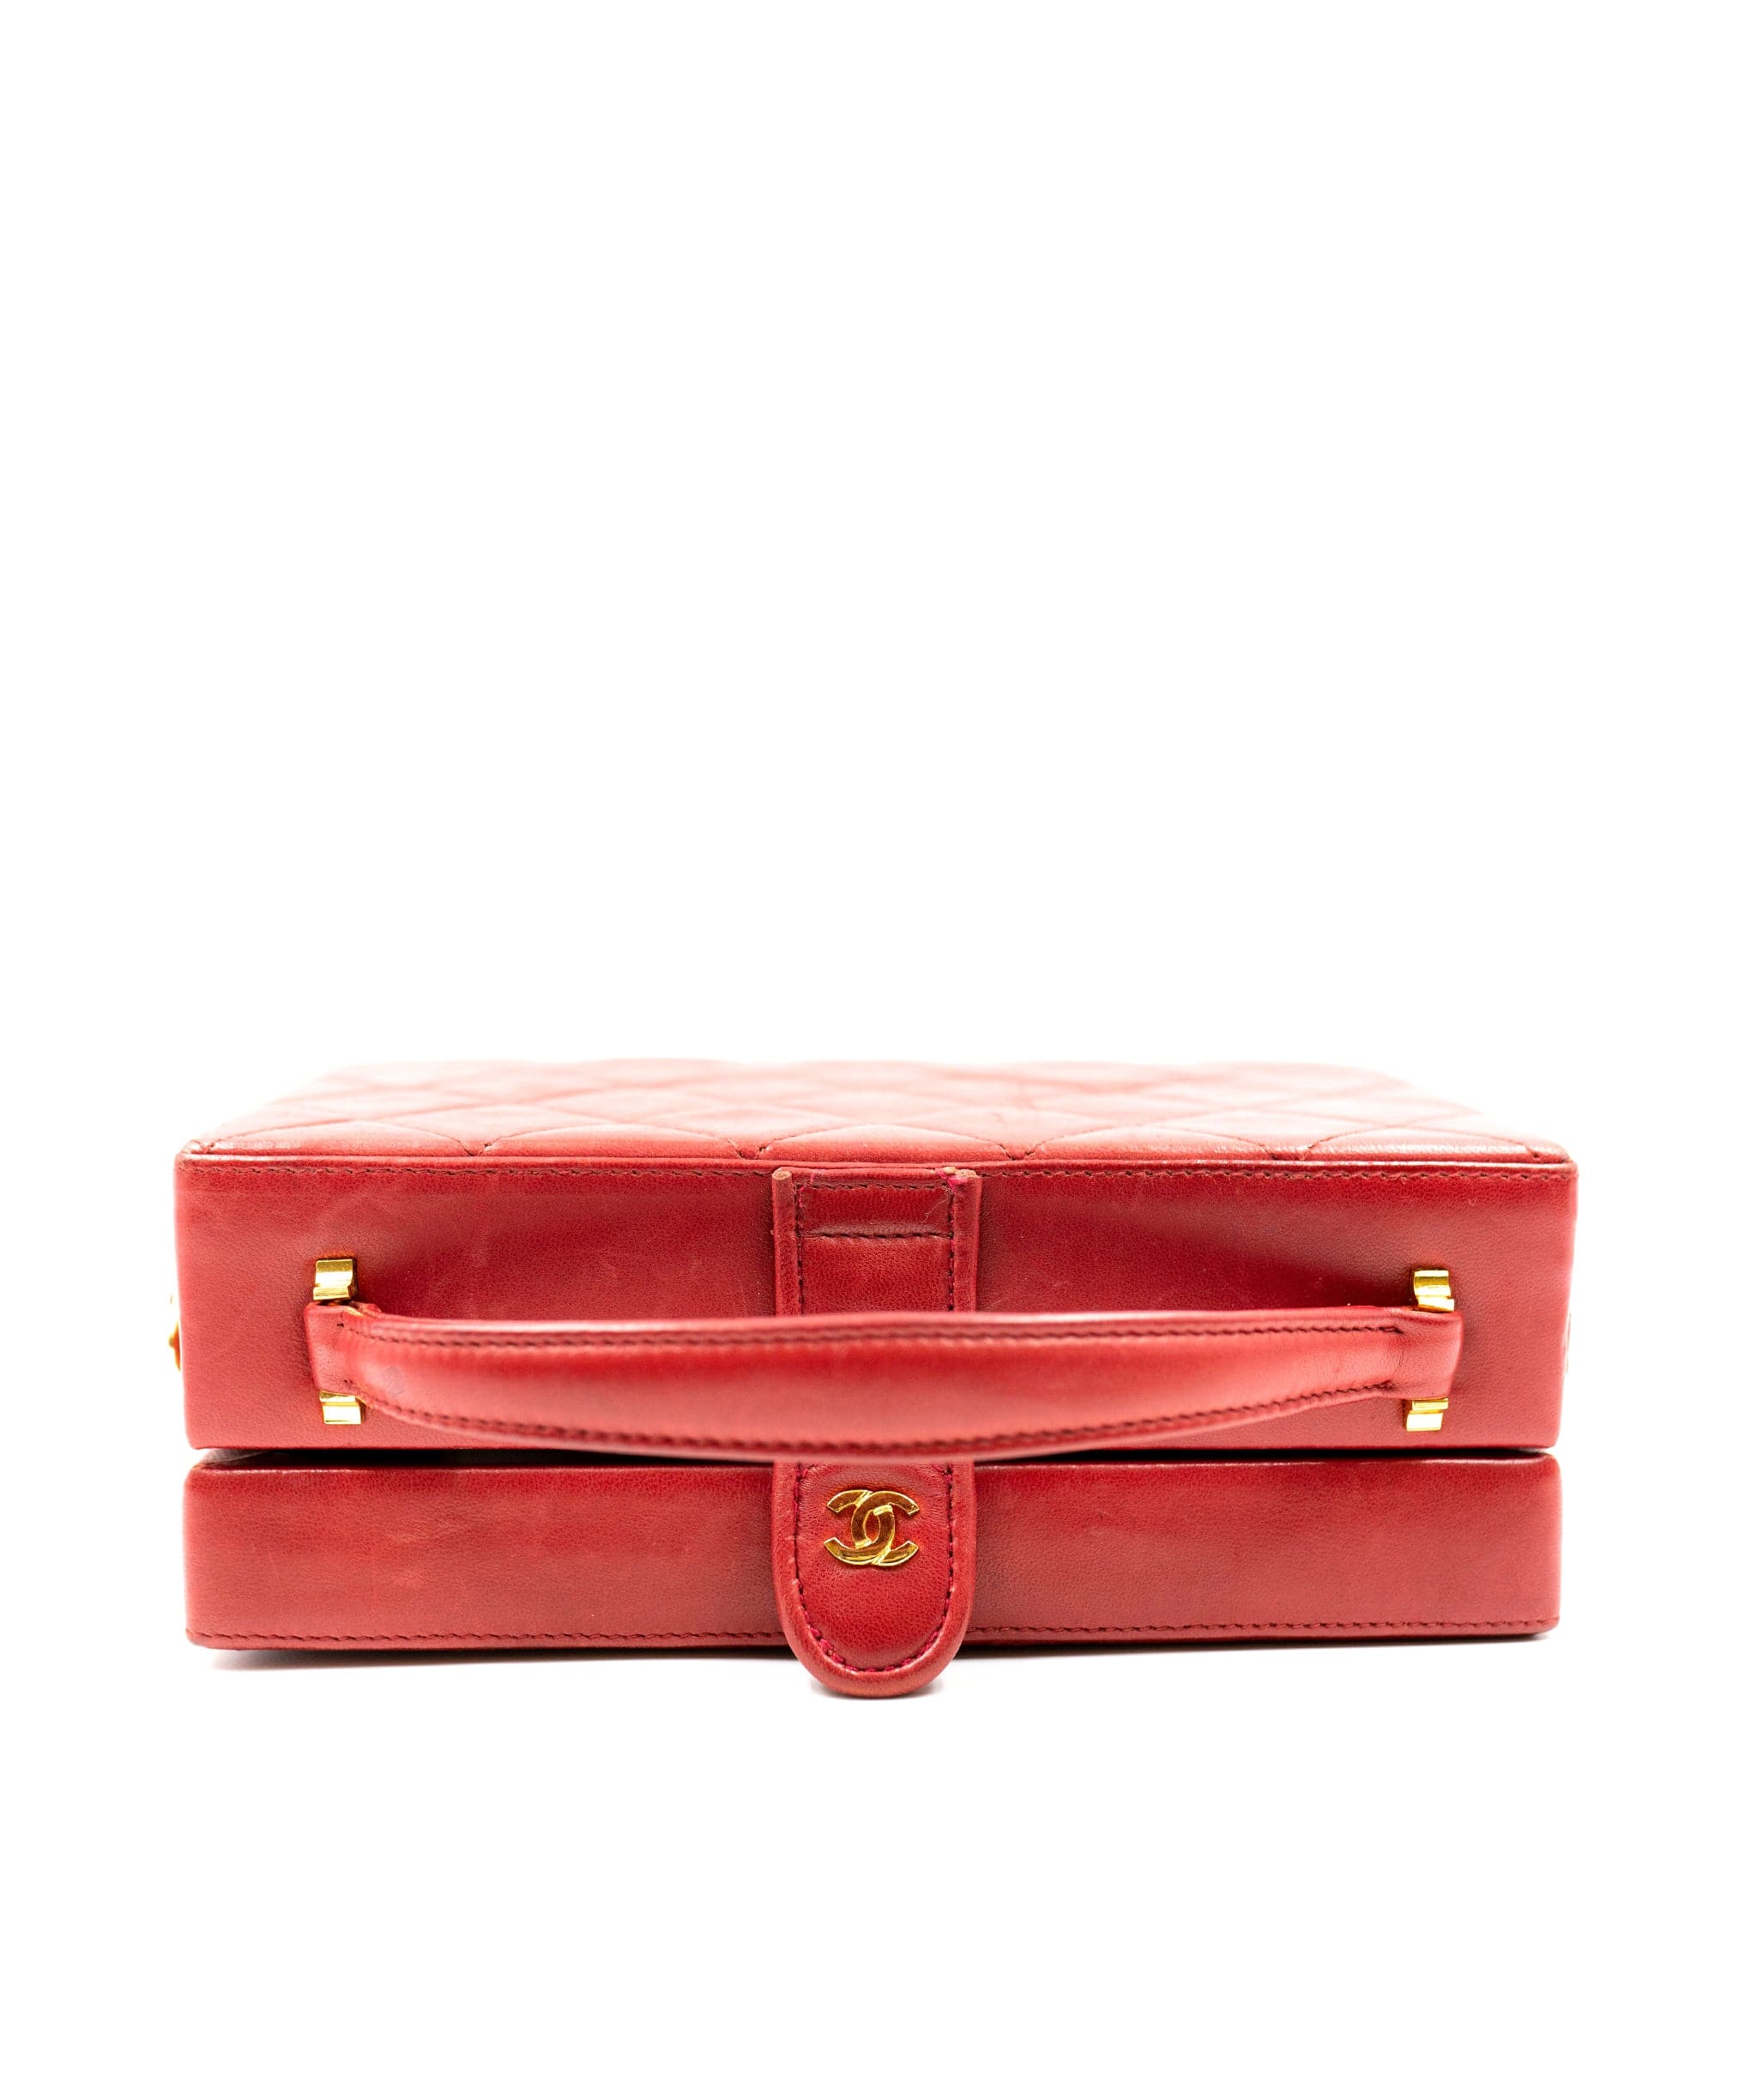 Chanel Rare Vintage Chanel Red Box Vanity Case - AWL2263